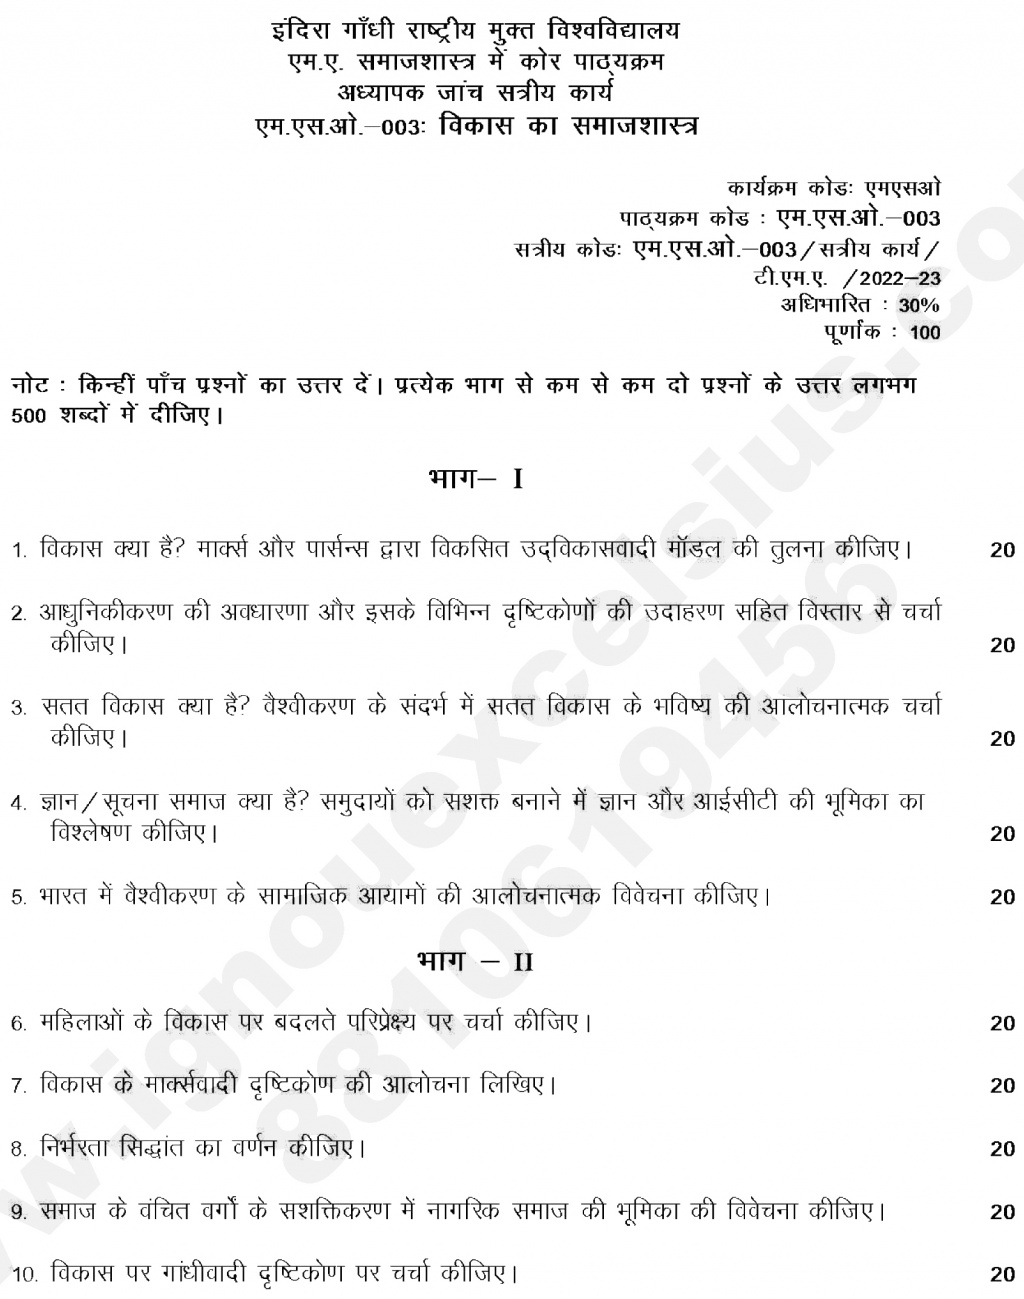 IGNOU MSO-03 - Sociology of Development, Latest Solved Assignment-July 2022 – January 2023